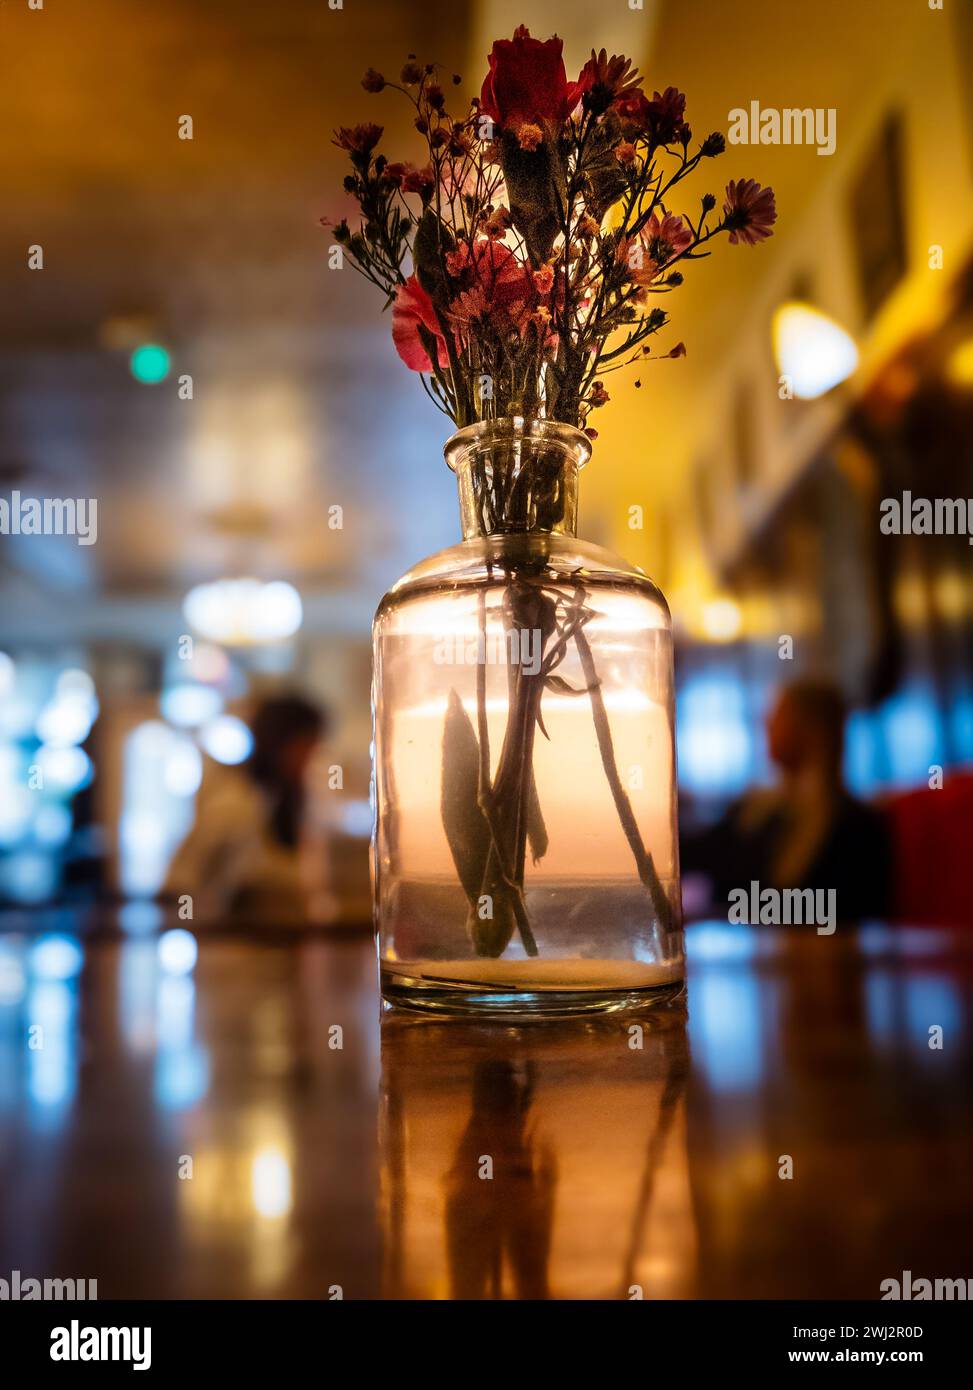 Decorative flowers on the table with a  blurry background in the Voorschoten, Netherlands Stock Photo